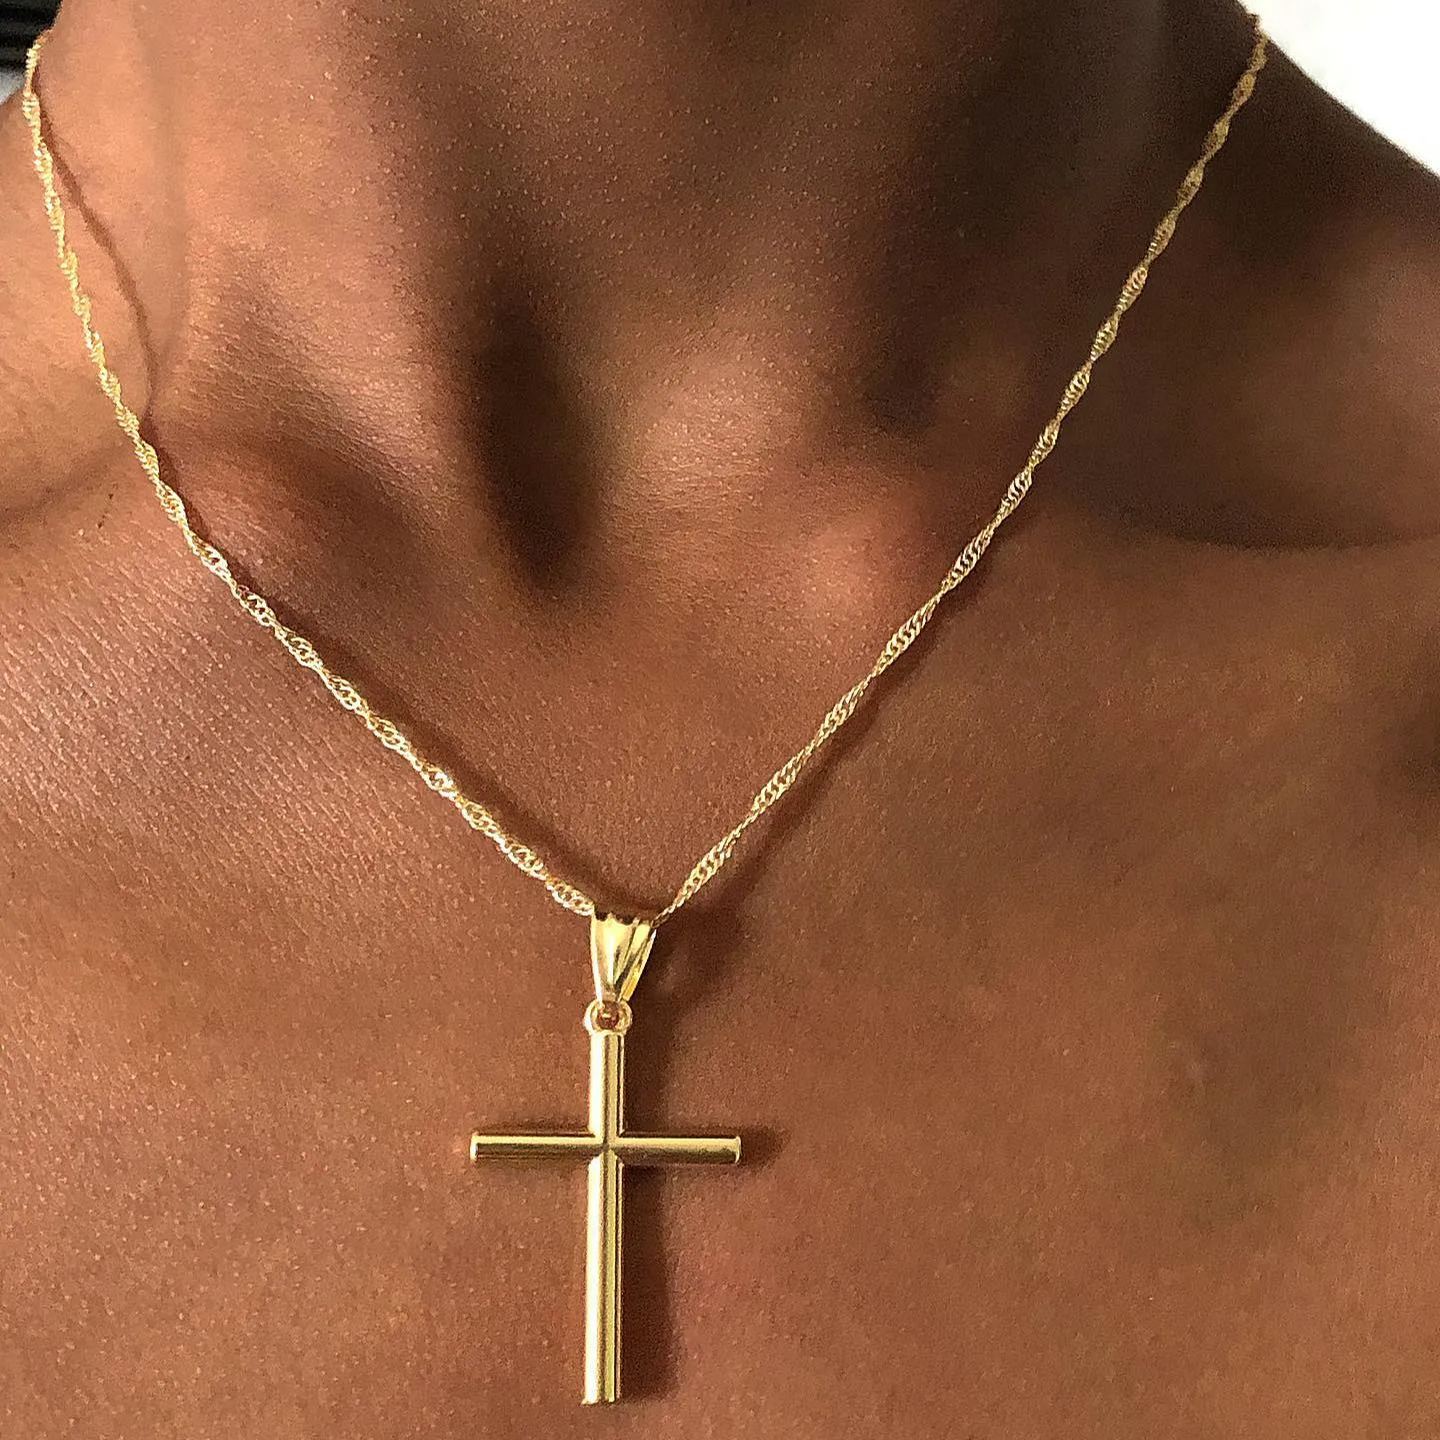 [Copy]Iced Hollow Cross Necklace Gold Plated Rope Chain Necklace